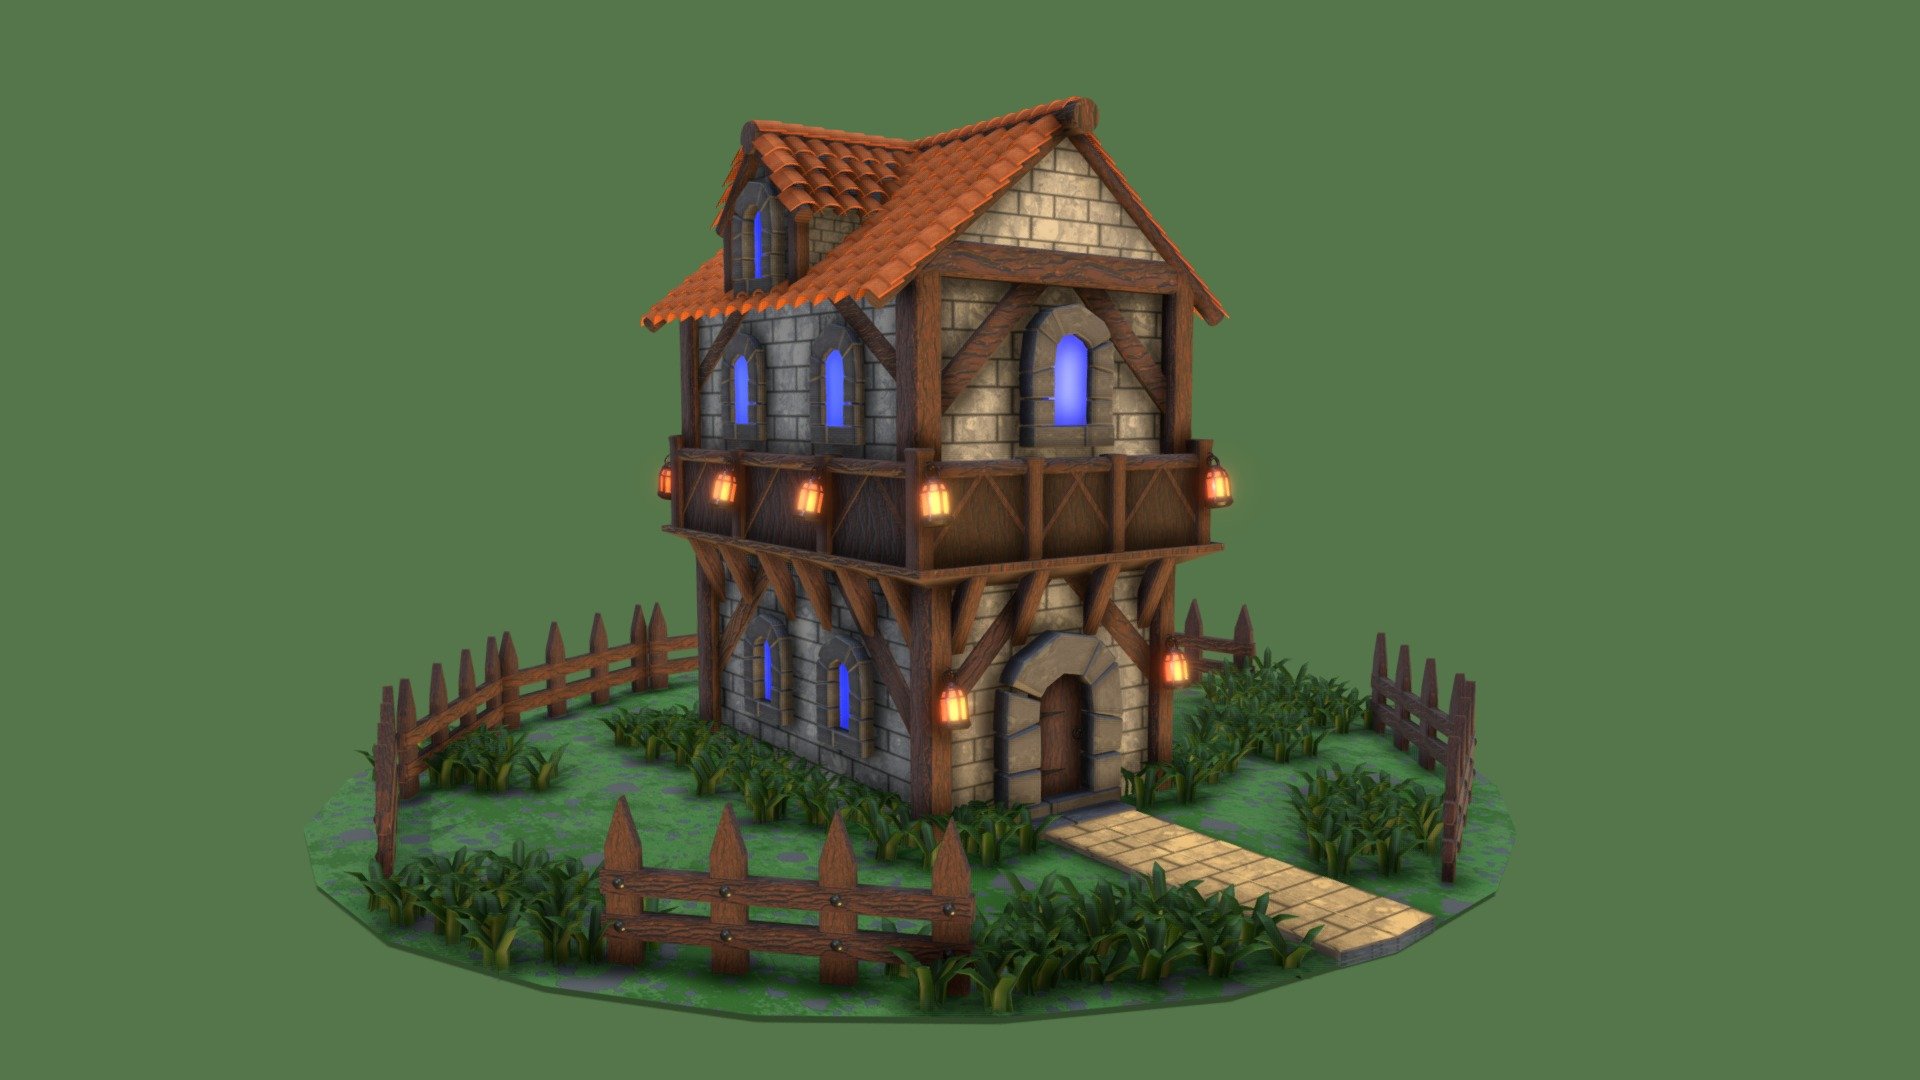 made a house coz i havent made any enviroment stuff in a while and wanted to make some more 3d model